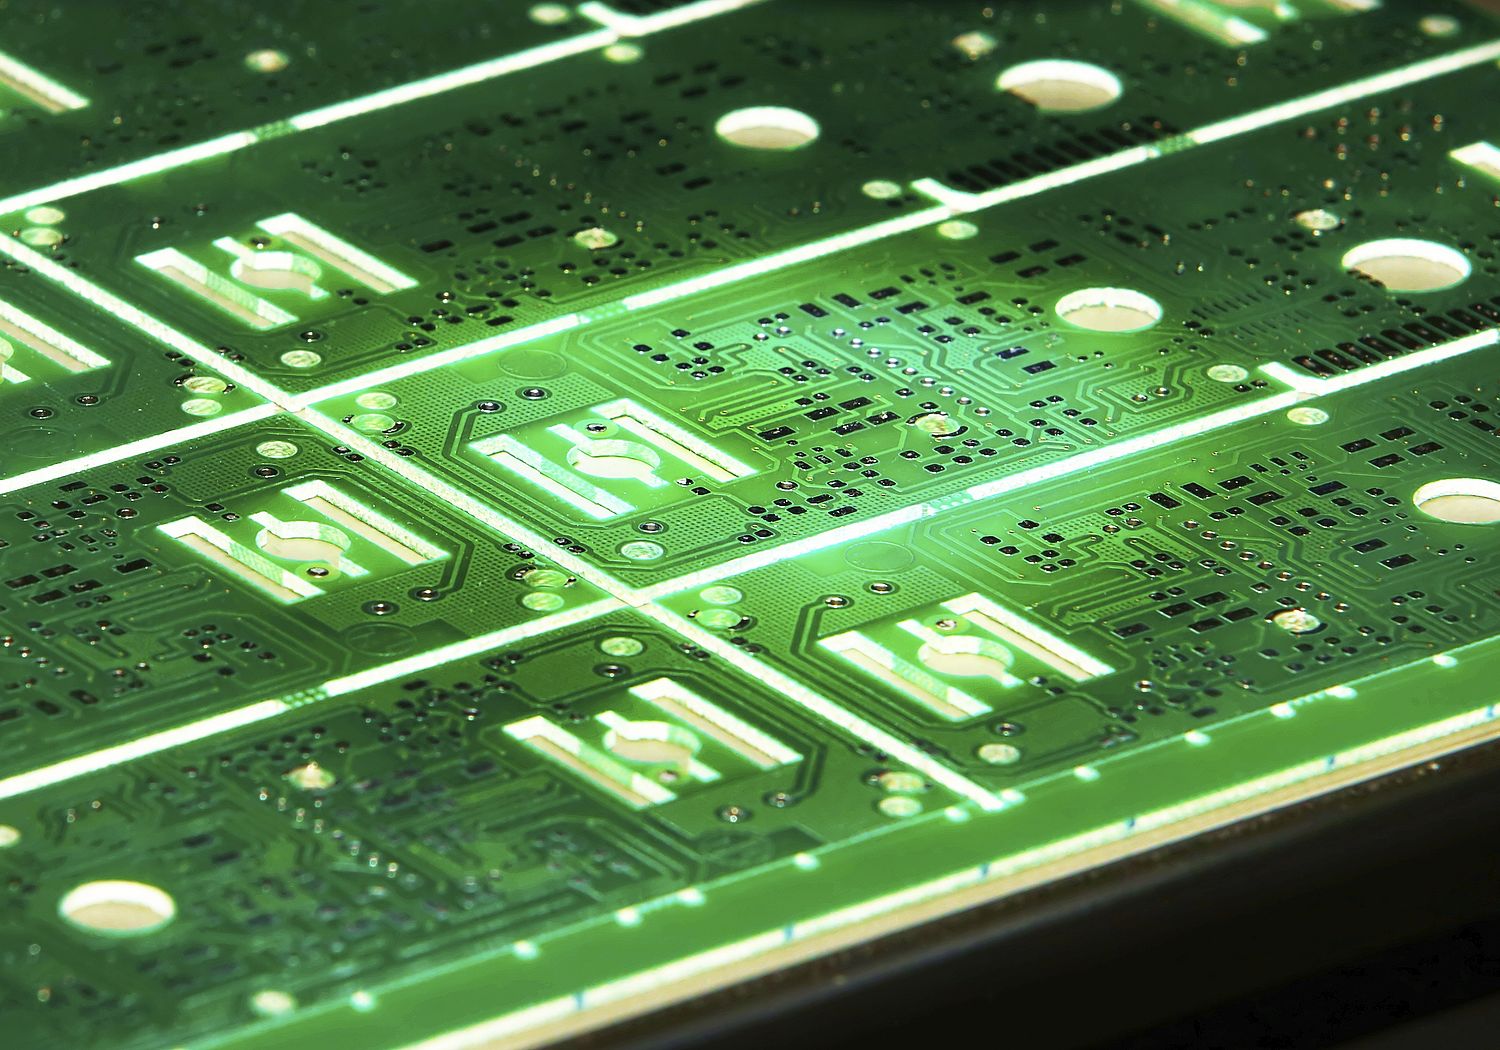 Image of a Printed circuit board